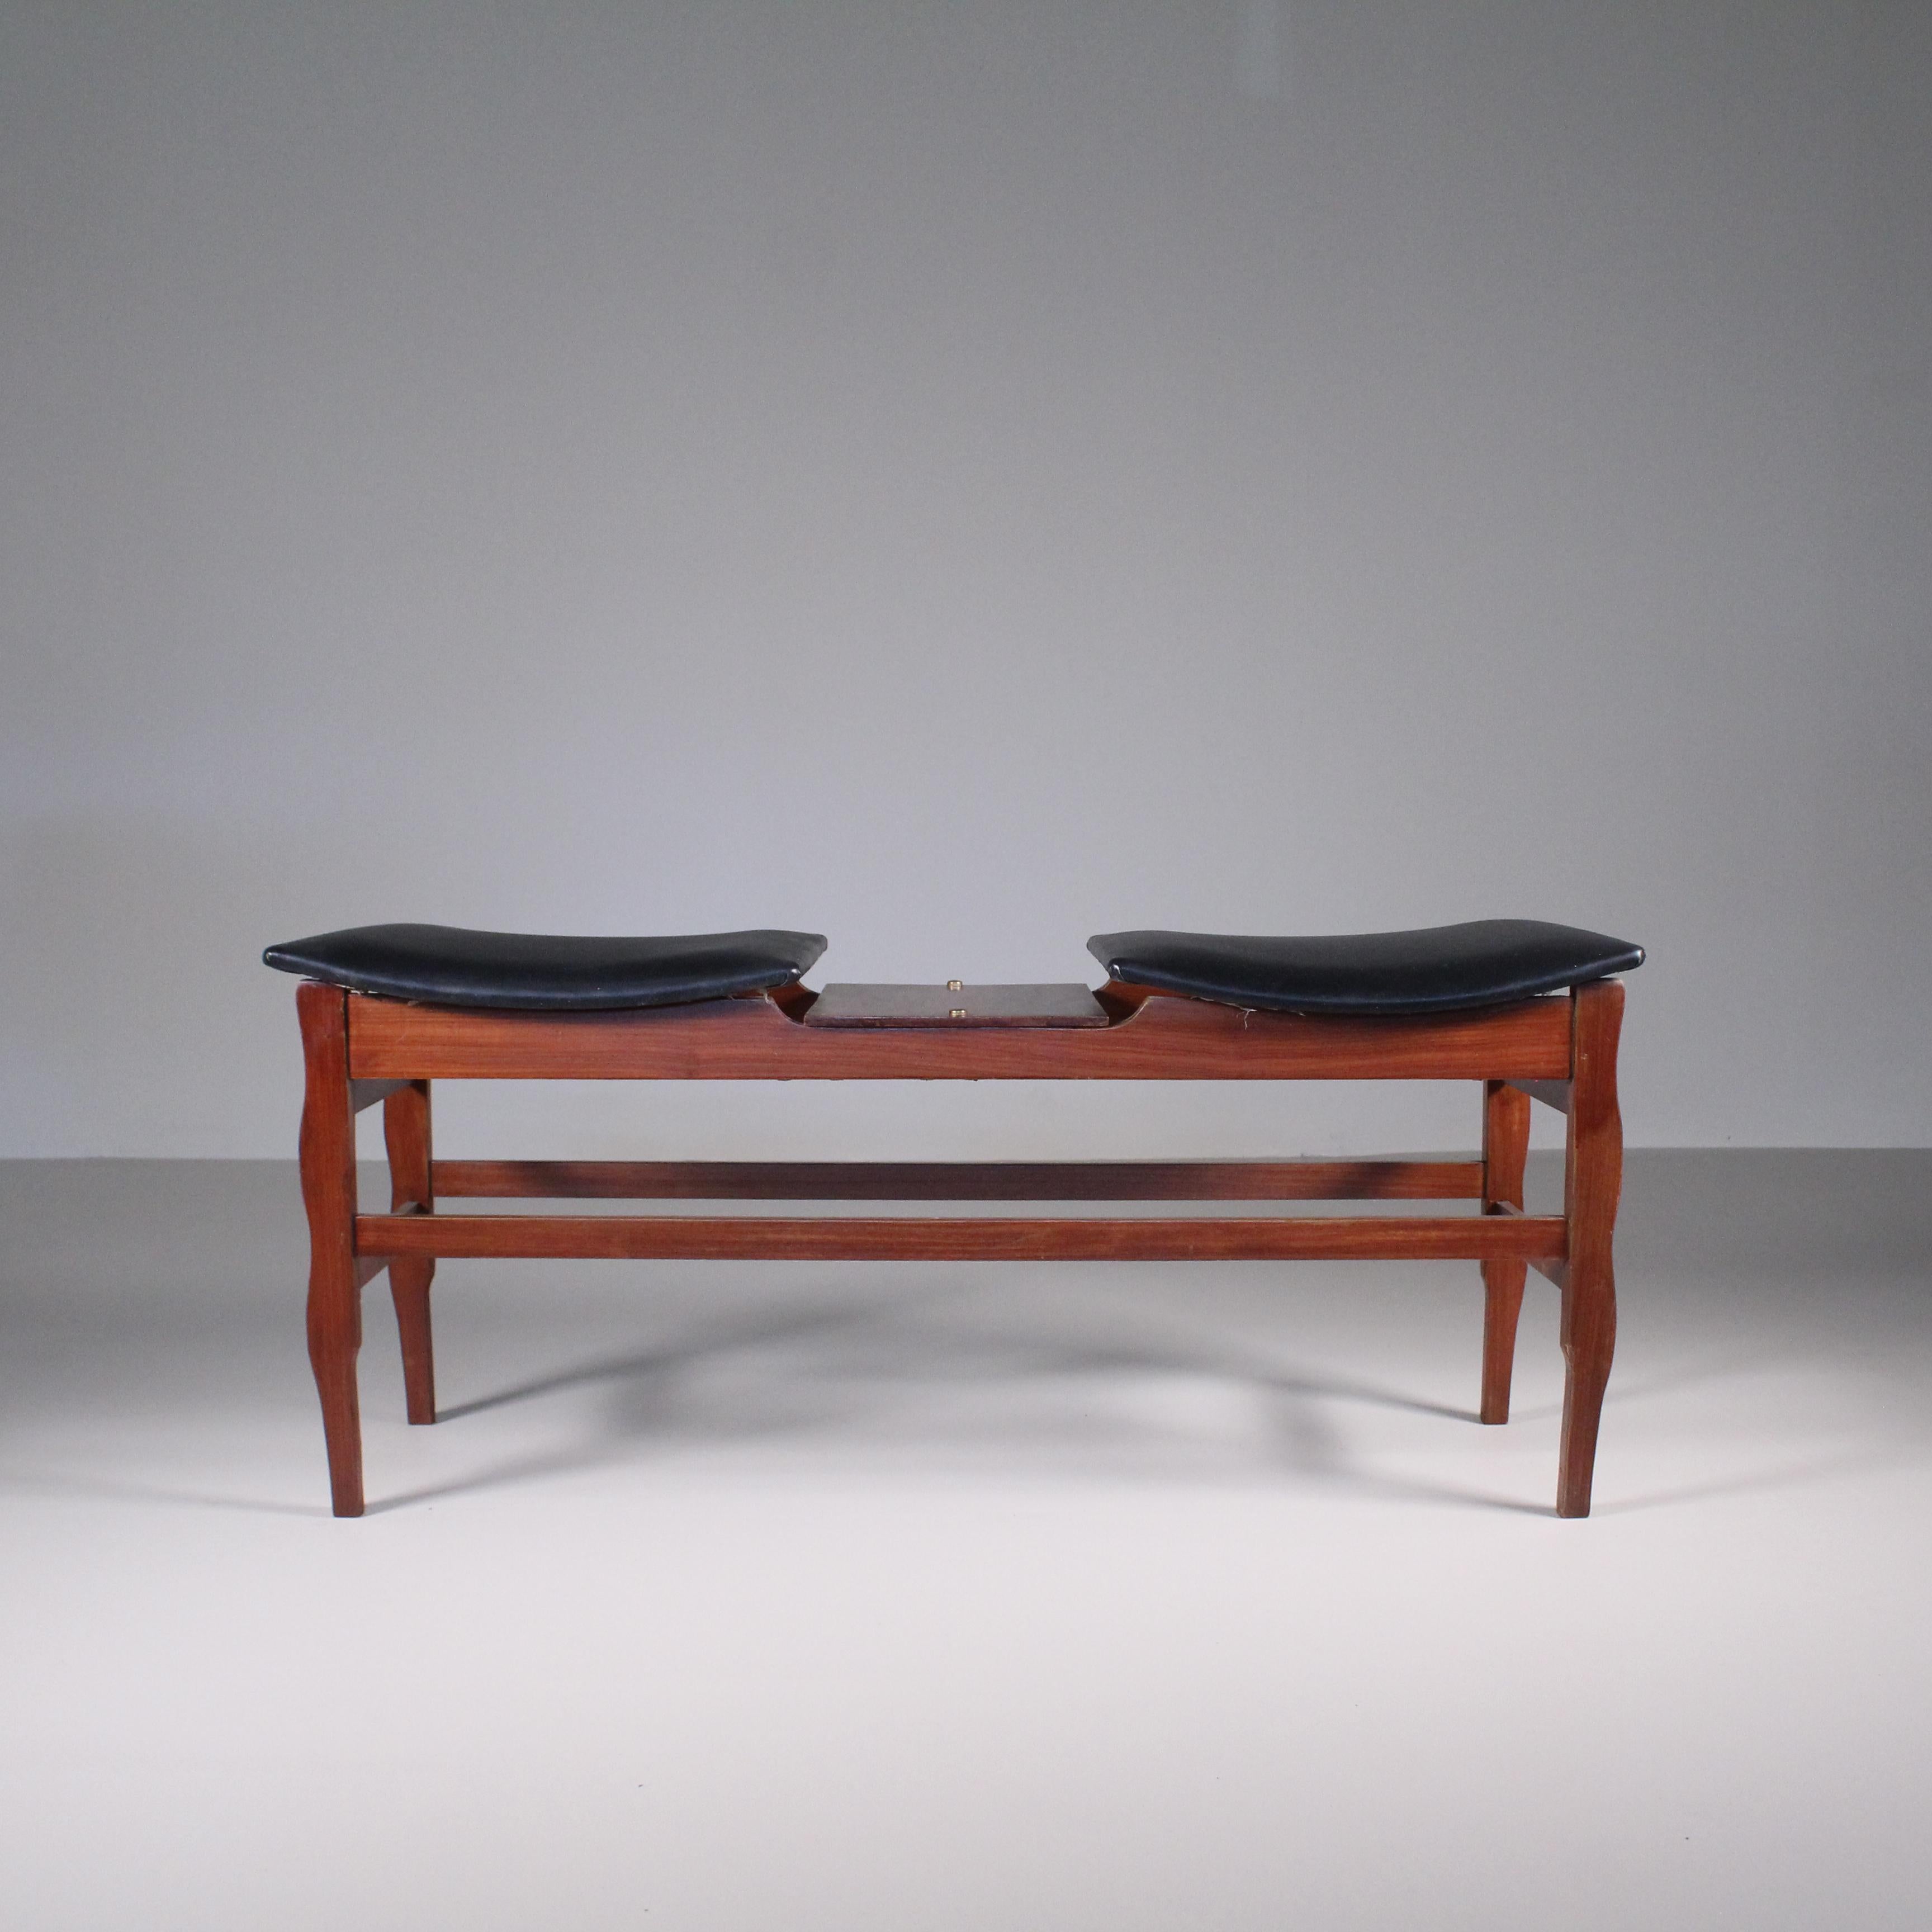 An elegant and rational object with a vague Japanese inspiration. A small bench that can be placed in a classic setting but also in a more contemporary one. 
We have restored the wood thanks to the technique of our skilled craftsmen.